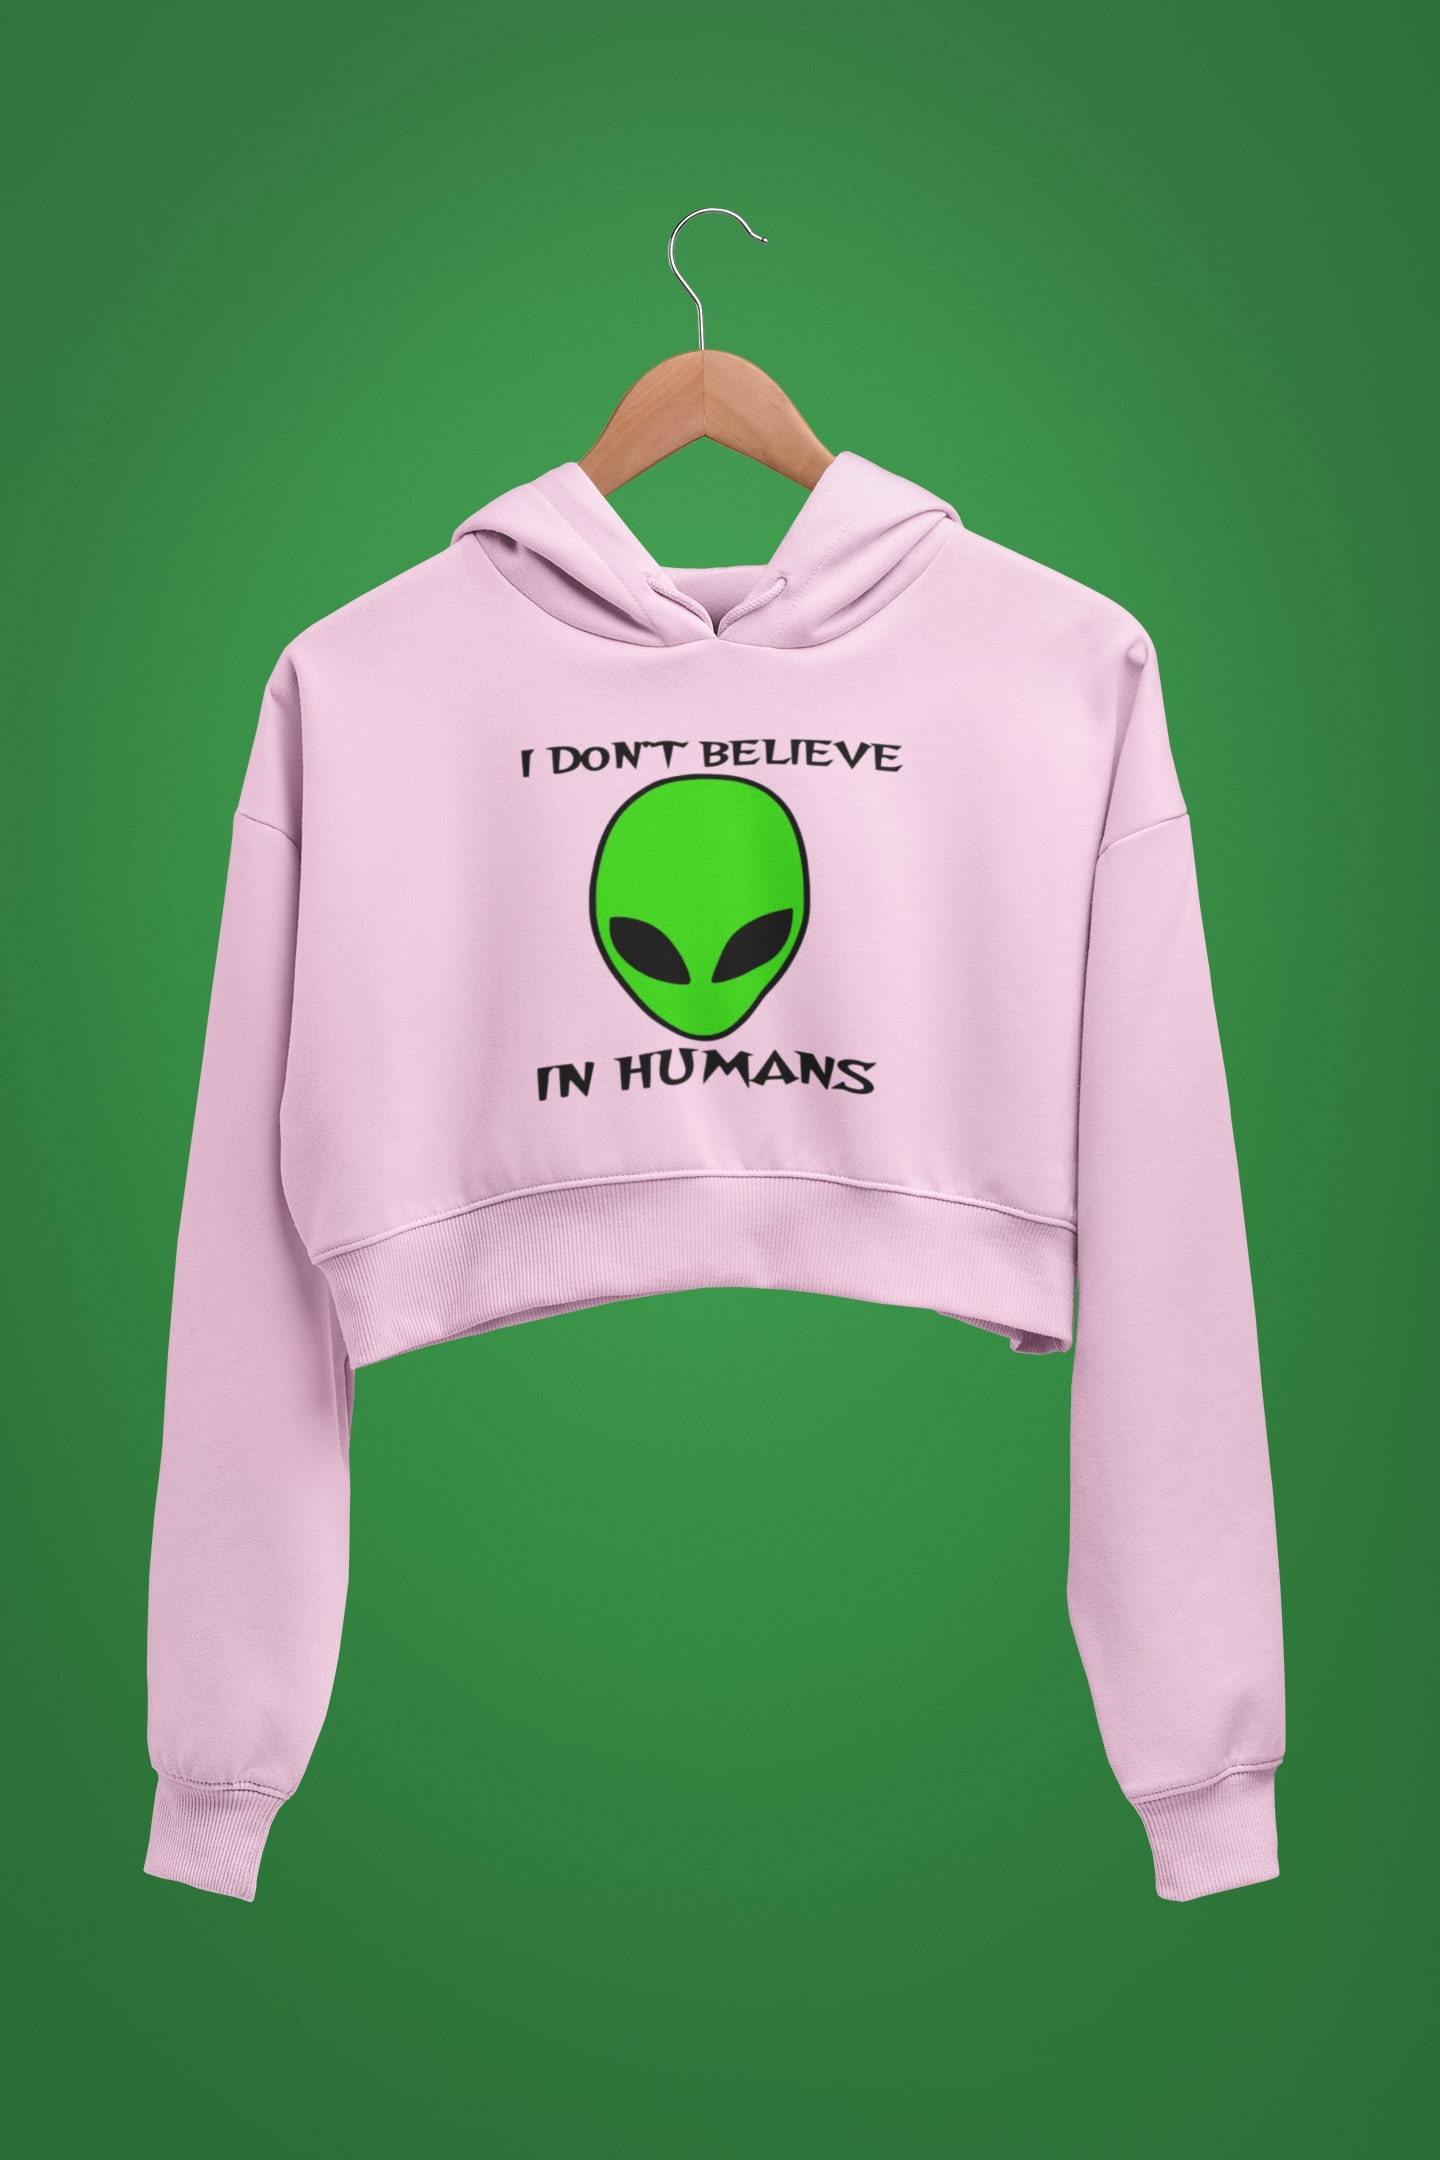 thelegalgang,I Dont Believe in Humans Graphic Crop Hoodies,.